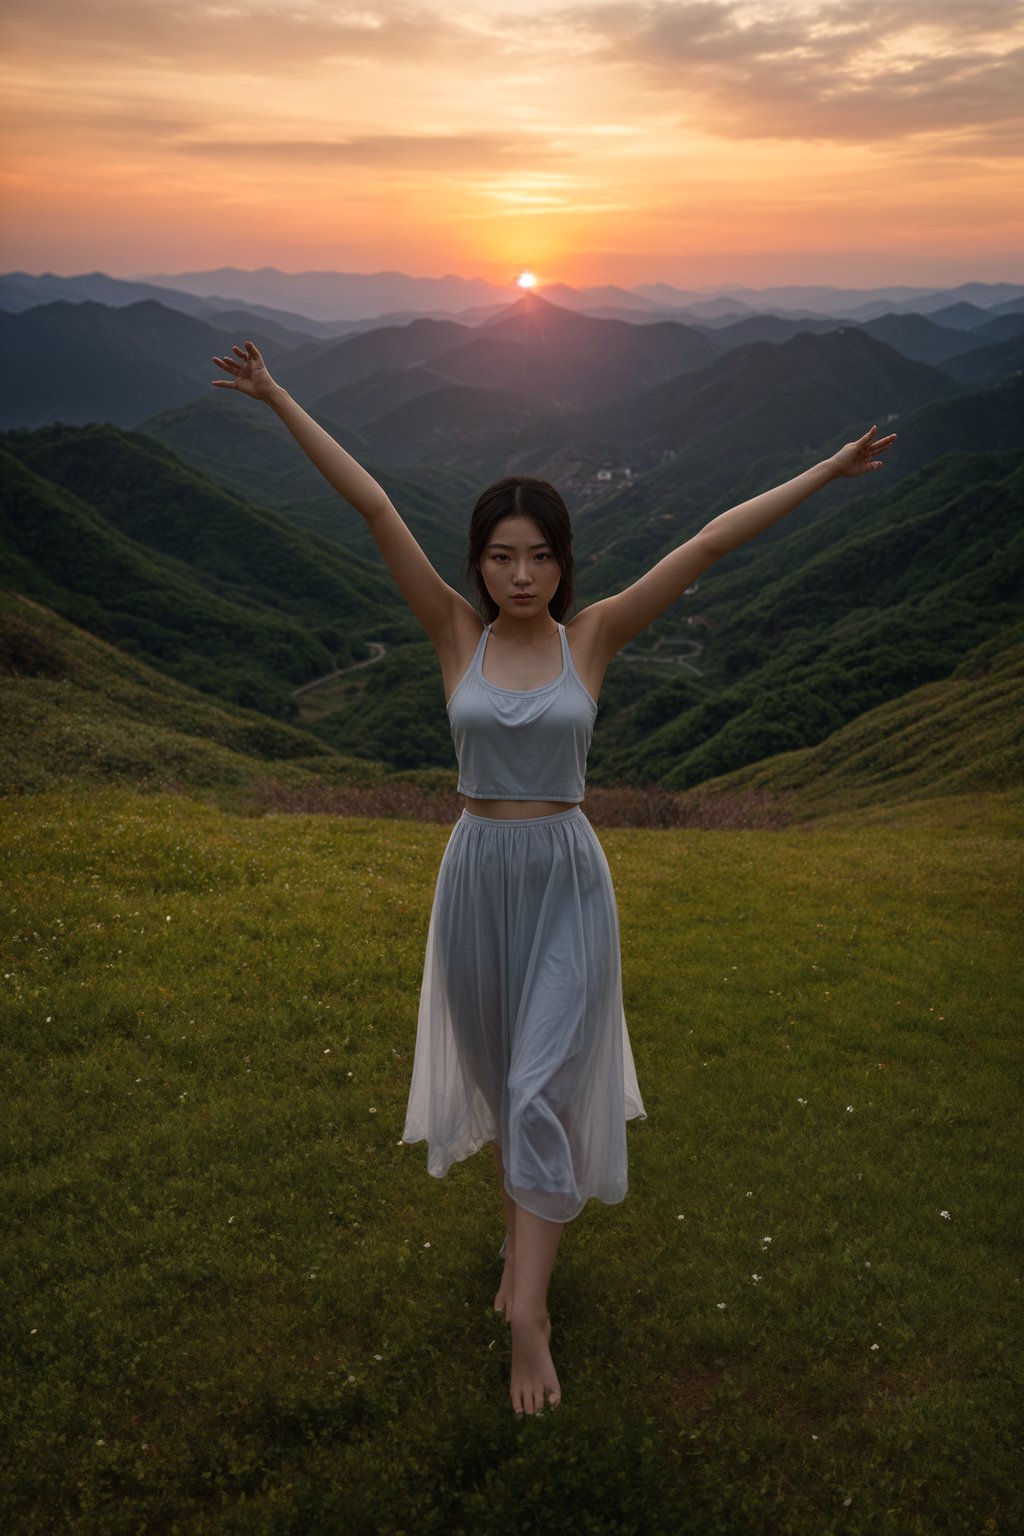 a spiritual seeker woman standing with outstretched arms, embracing the beauty of the sunrise or sunset, symbolizing gratitude and reverence for the universe